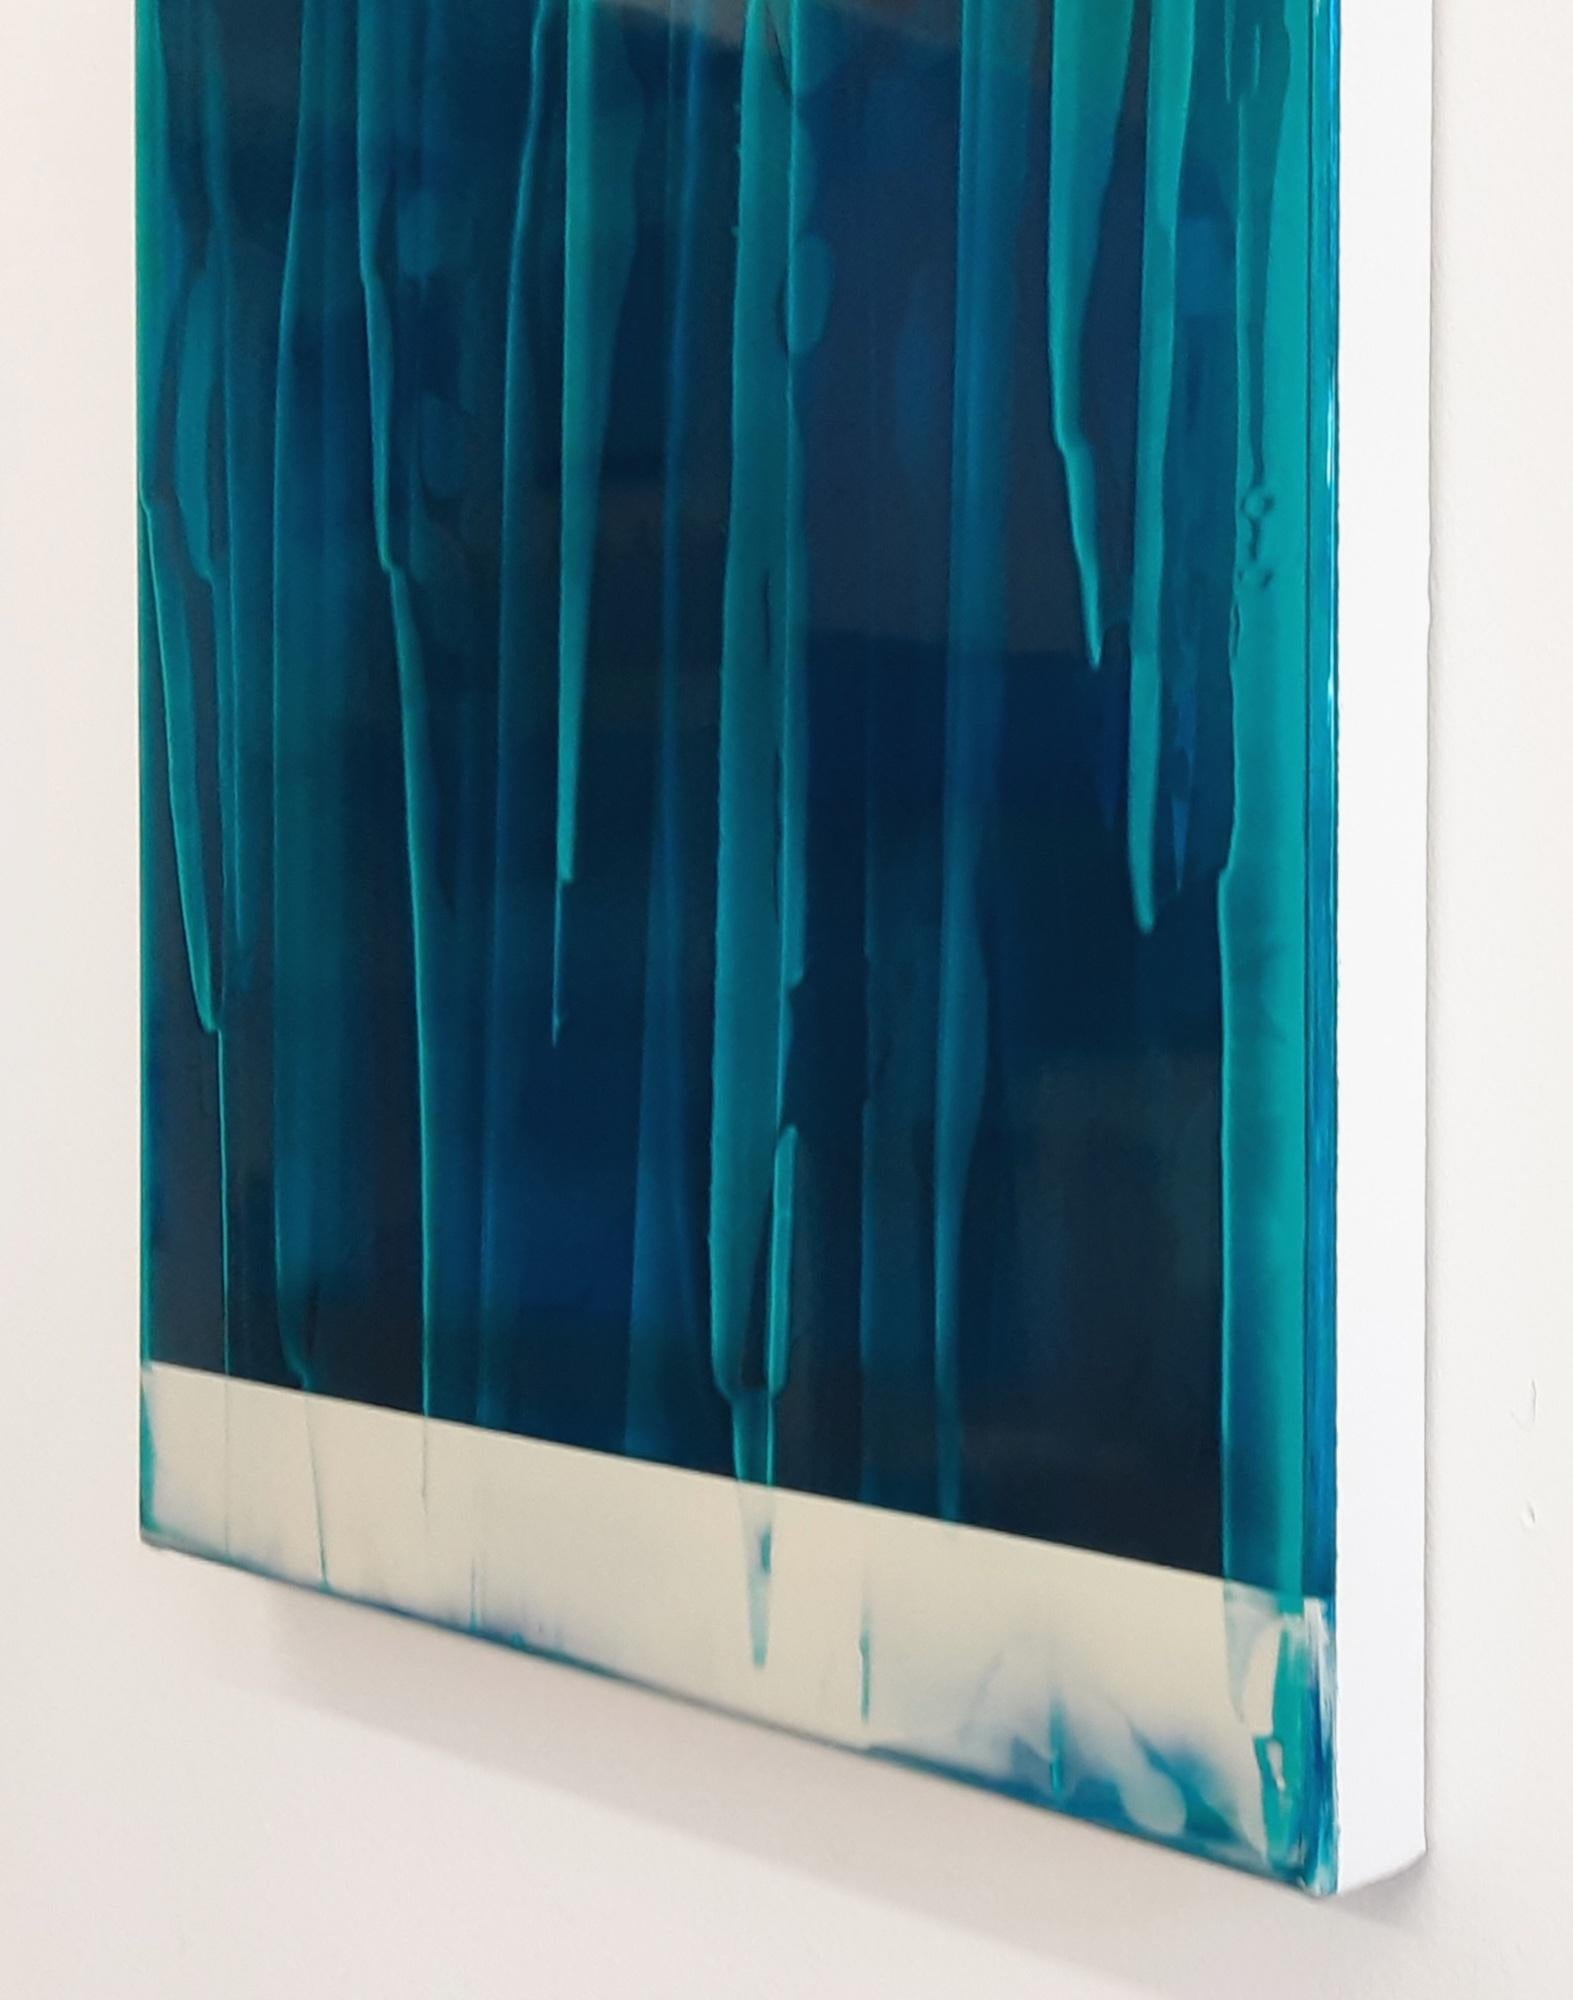 Echoes (1/19) by James Lumsden - Abstract colour painting, blue tones, gloss For Sale 5